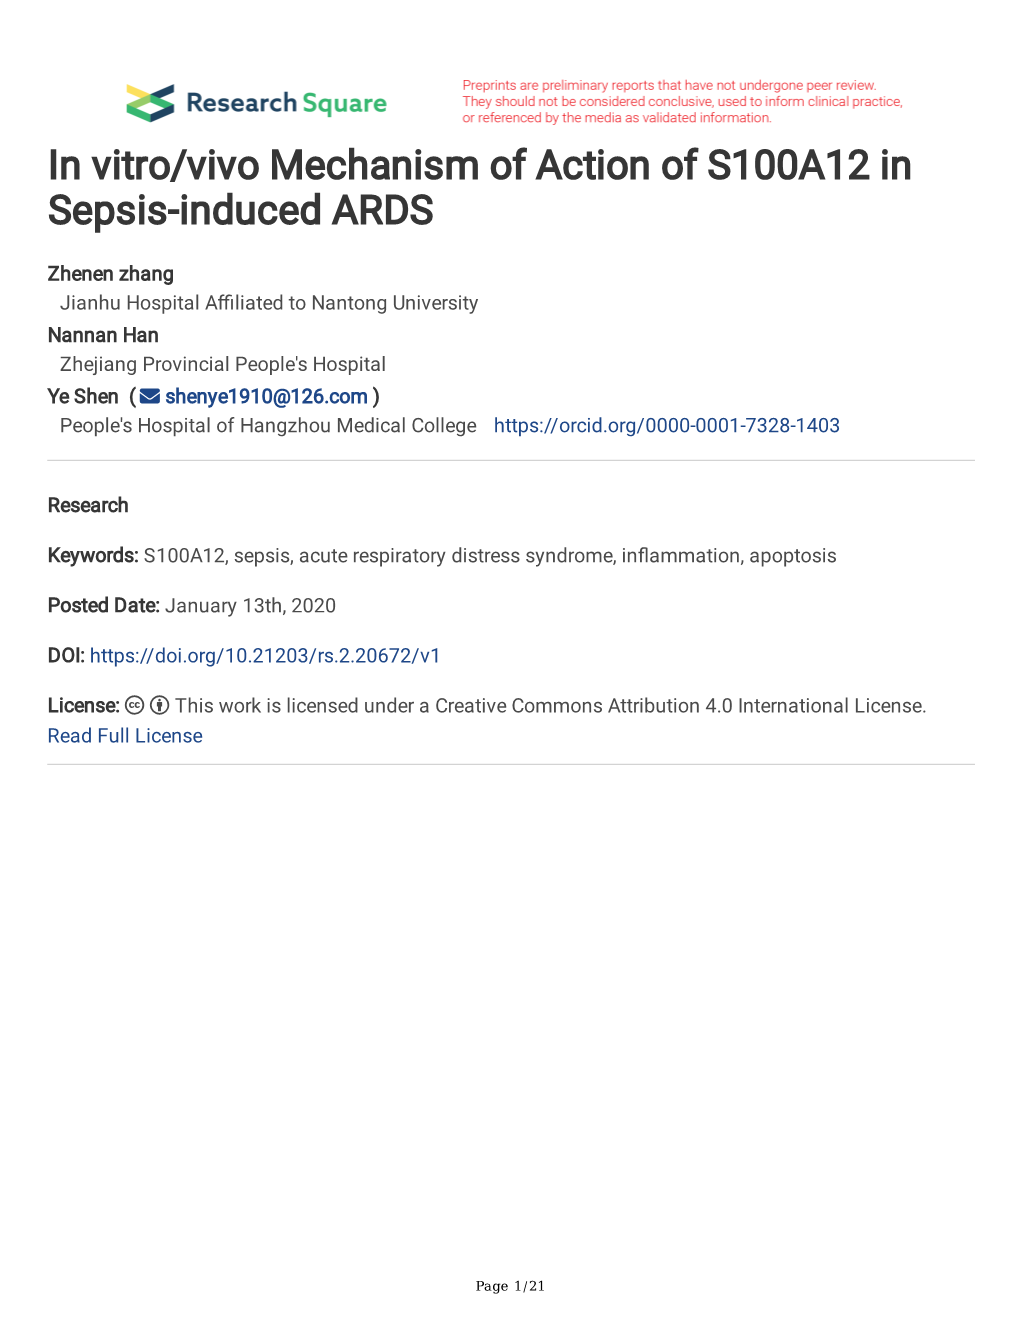 In Vitro/Vivo Mechanism of Action of S100A12 in Sepsis-Induced ARDS